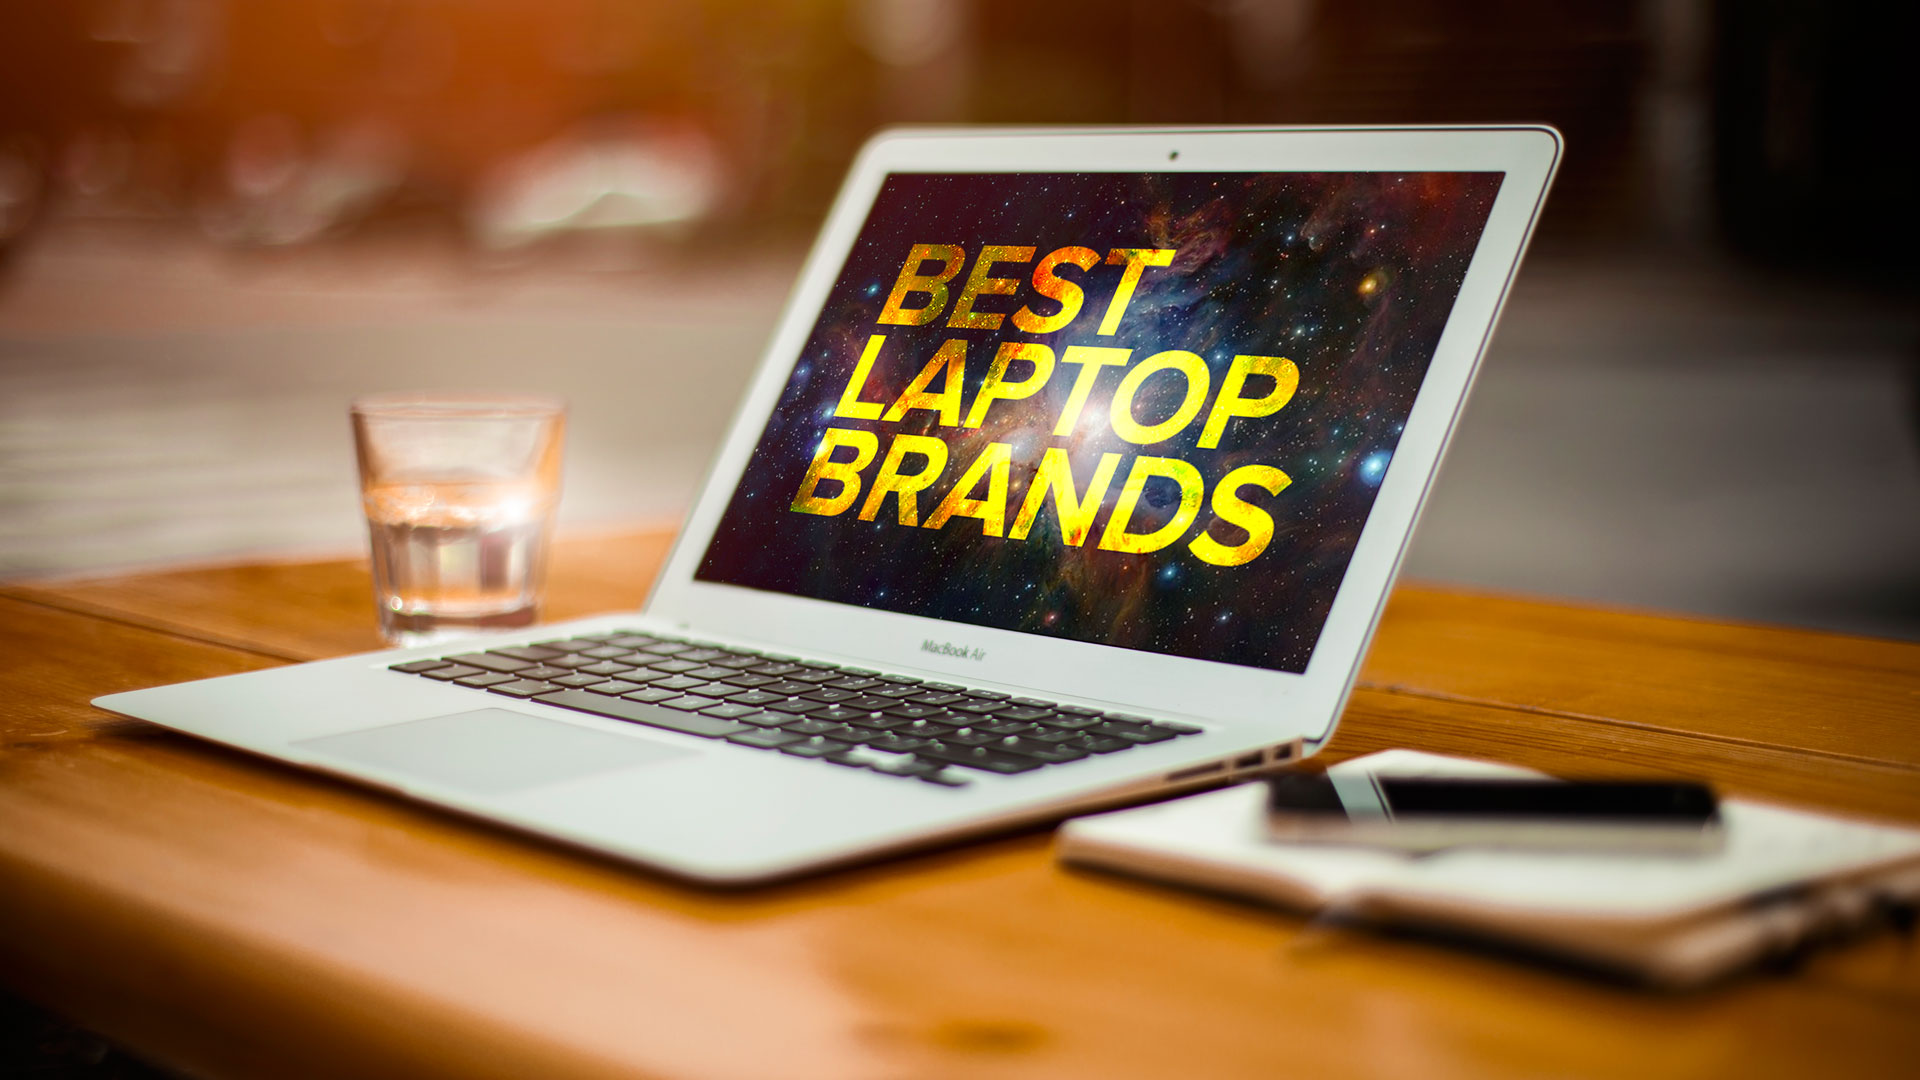 Best Laptop Brands by Durability, Reliability, and Serviceability - AtulHost